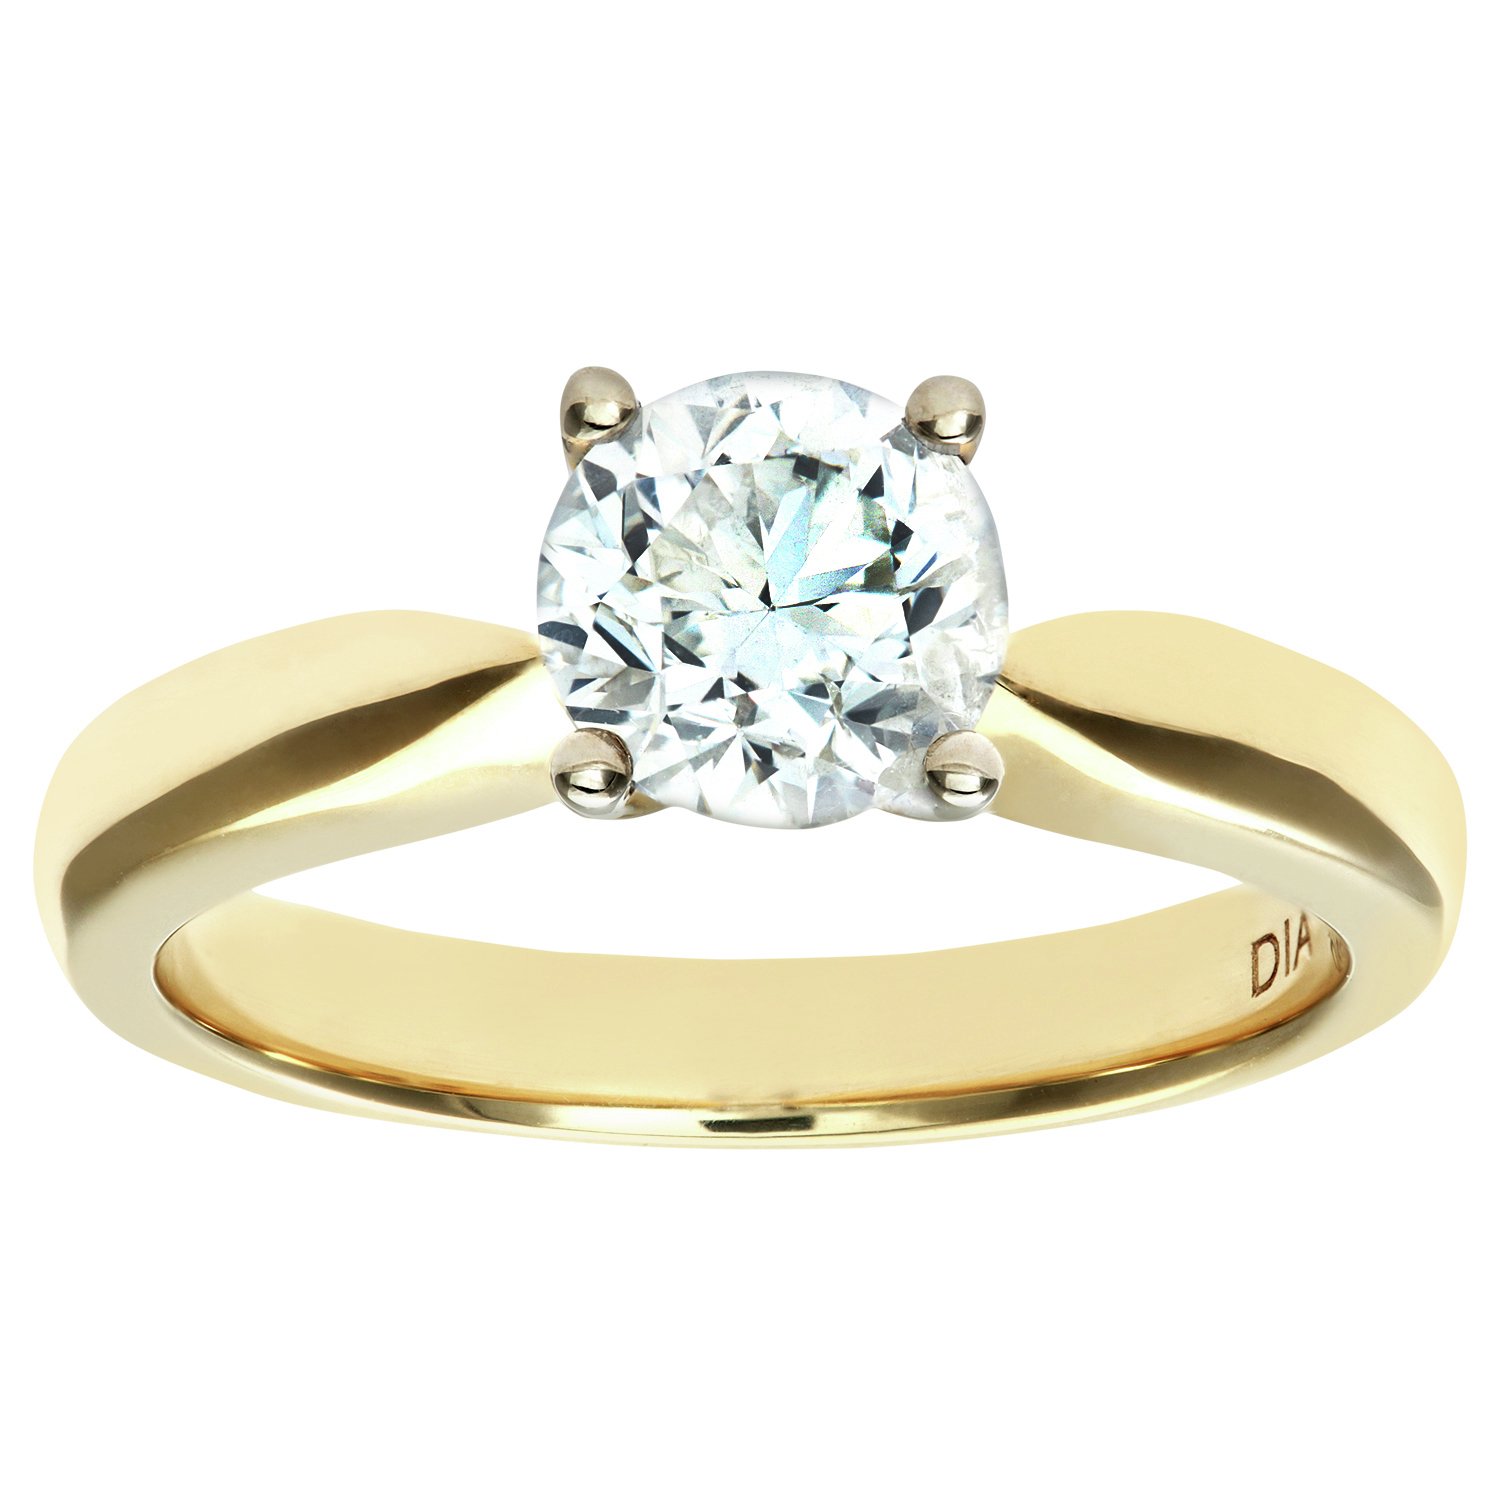 Everlasting Love 18ct Gold 1ct Diamond Solitaire Ring - N